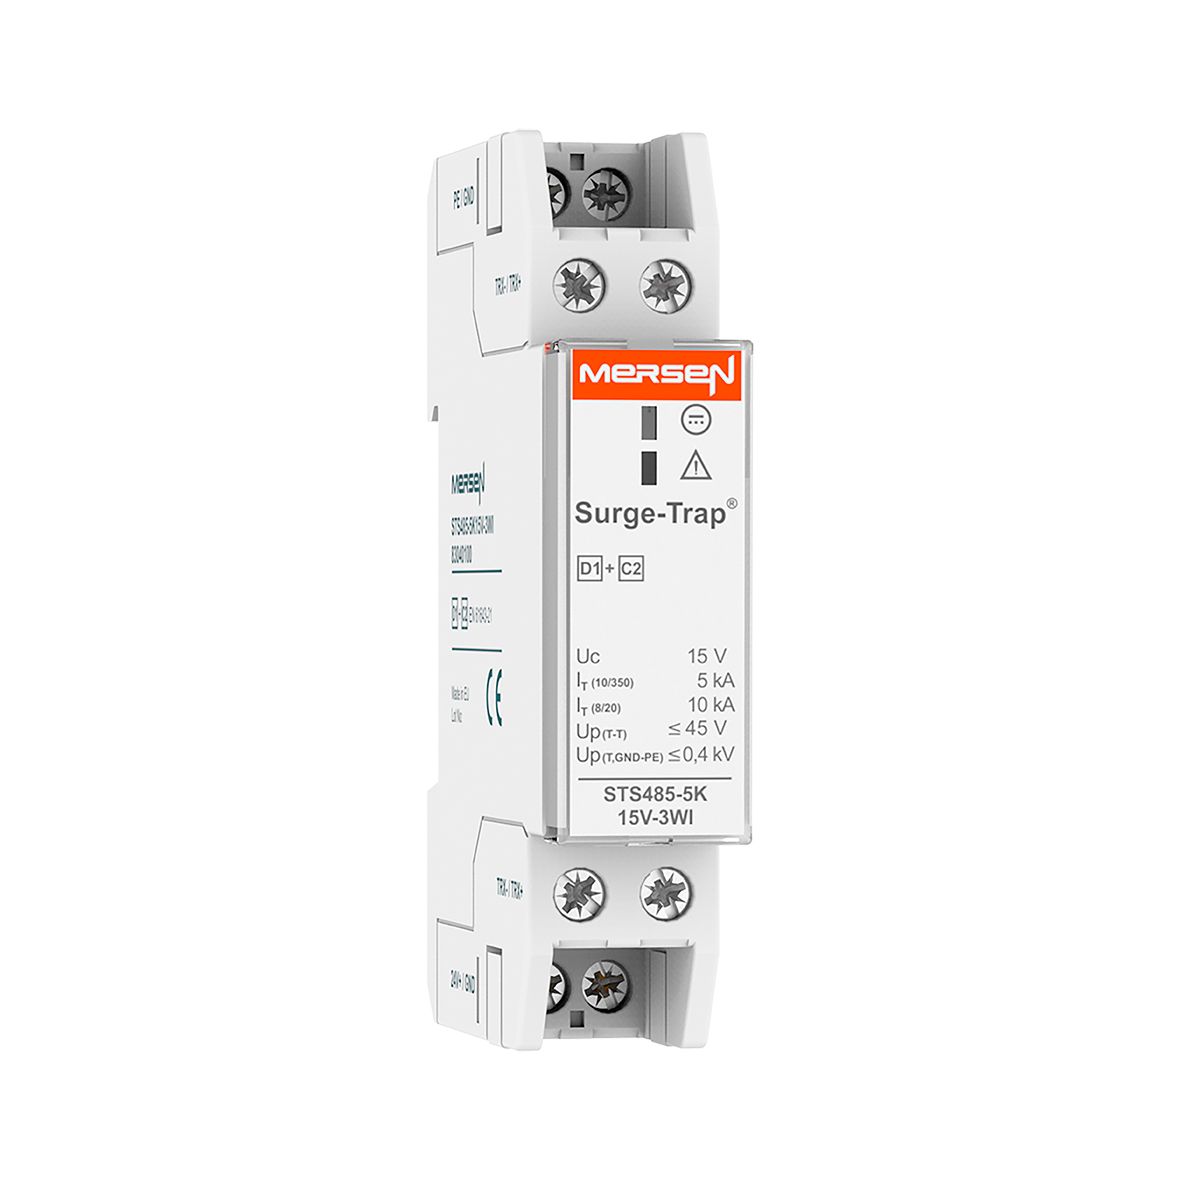 83040100 - SPD for RS485 communications. Maximum current 5kA, 1 pair + GND, EoL indication